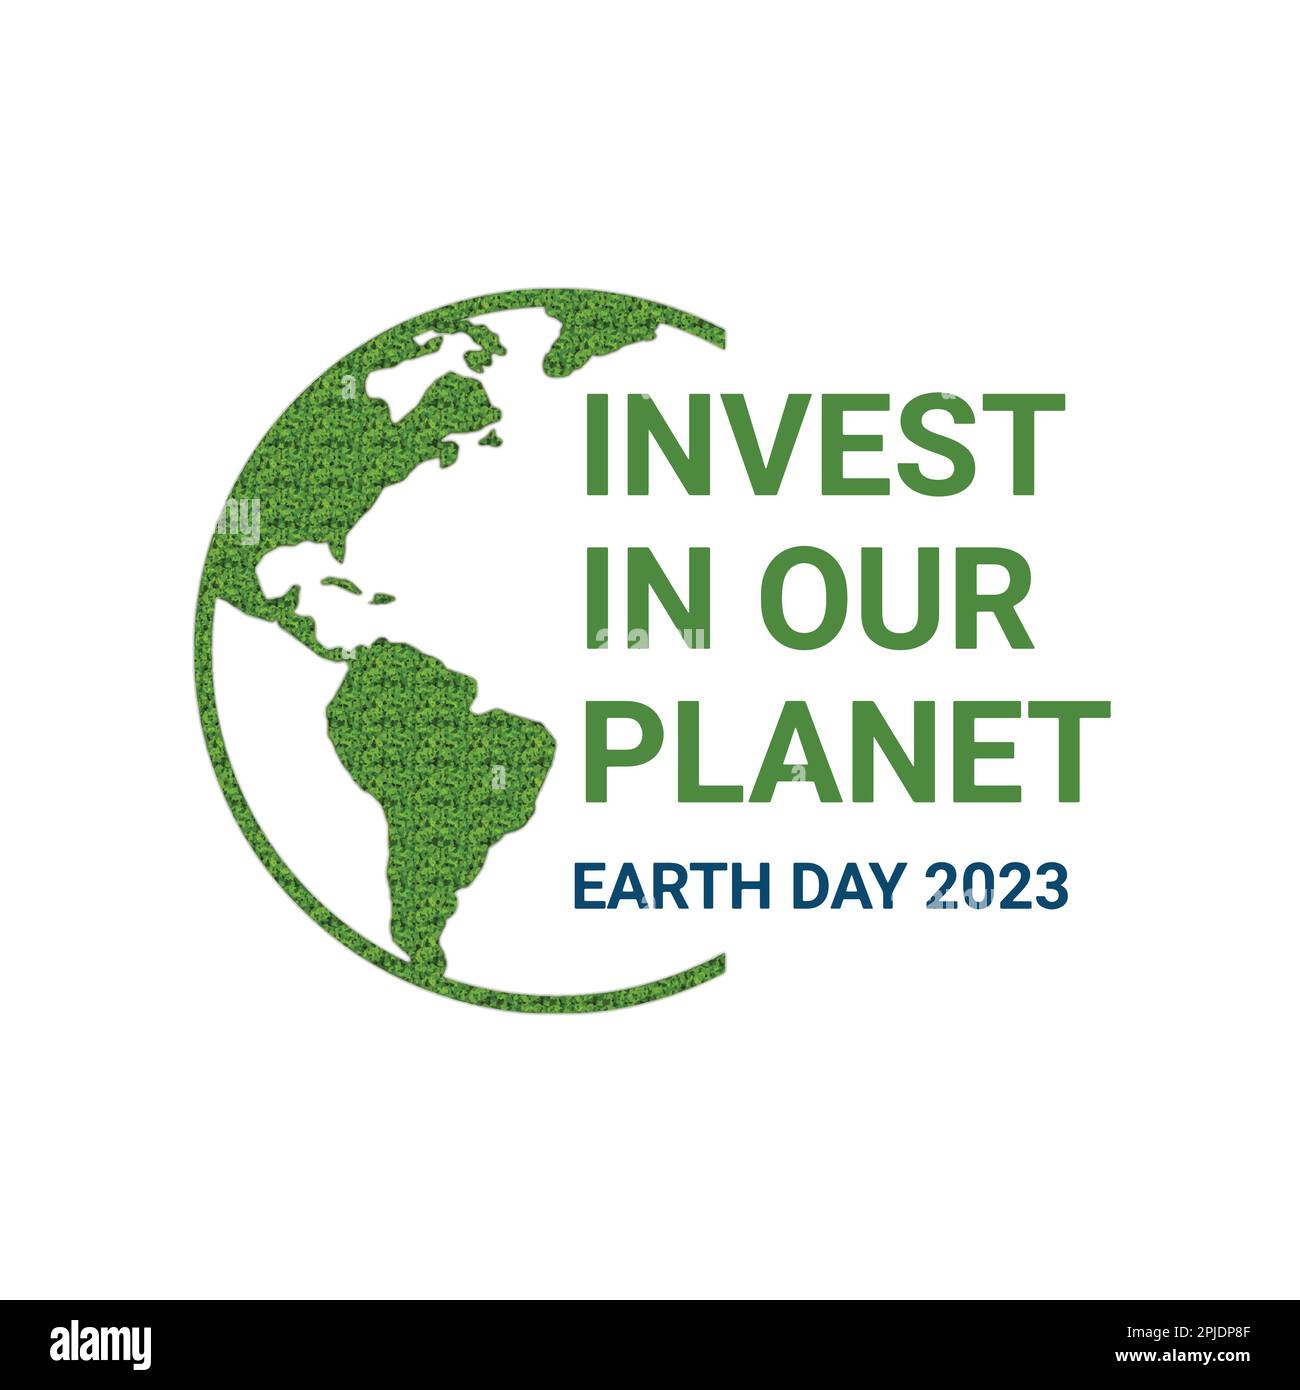 Invest in our planet. Earth day 2023 illustration concept background. Ecology concept. Design with globe map drawing and green grass isolated on white Stock Vector